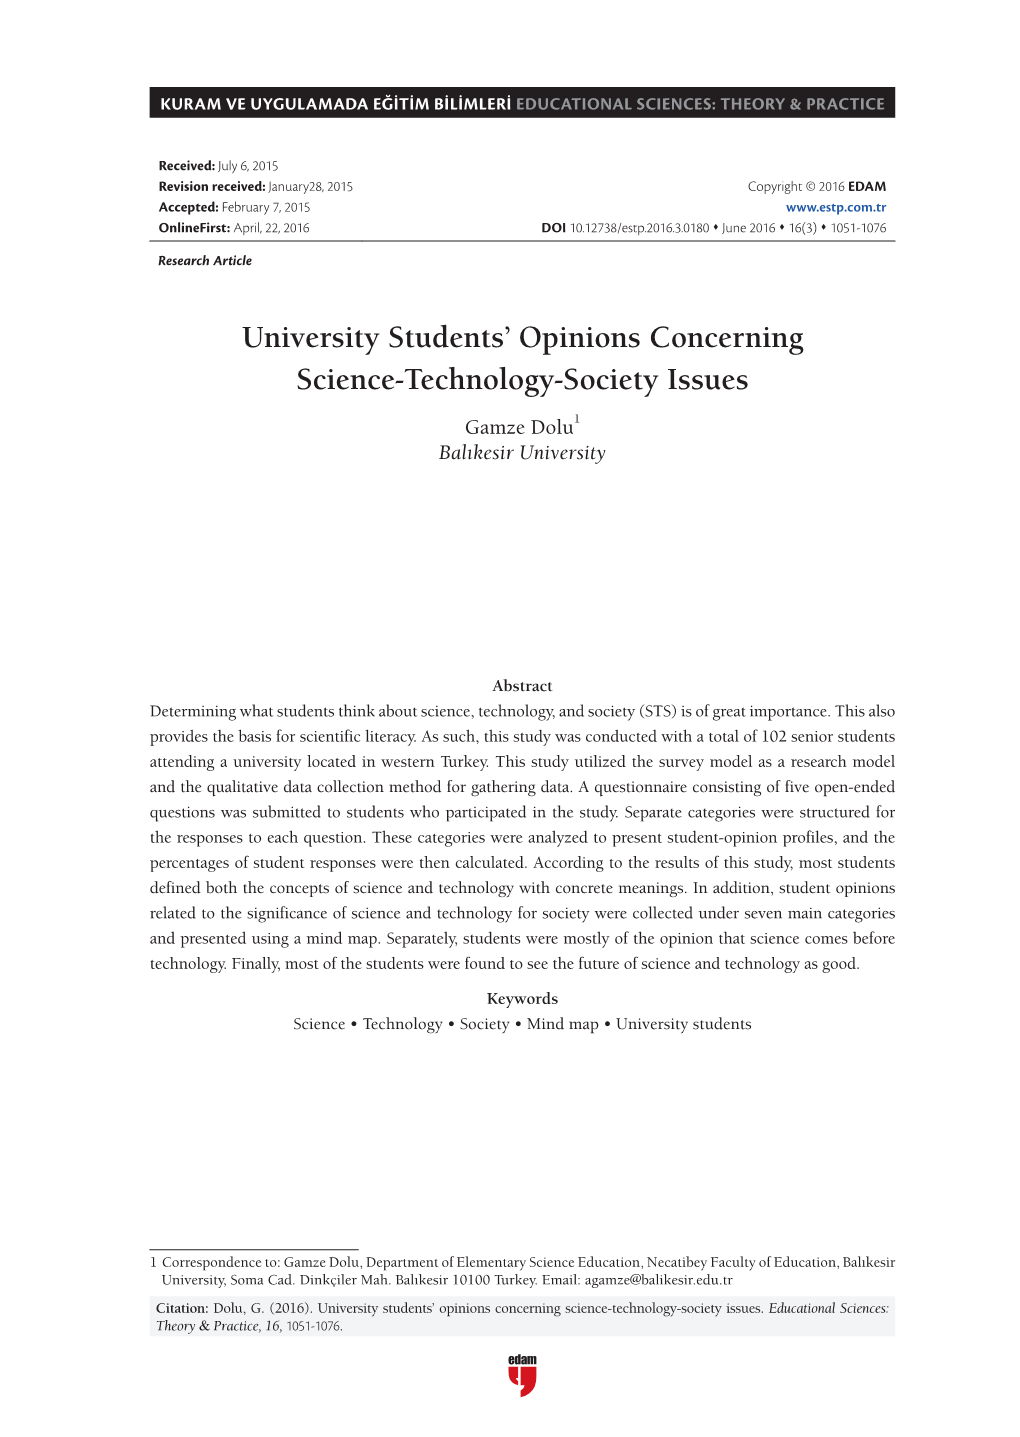 University Students' Opinions Concerning Science-Technology-Society Issues